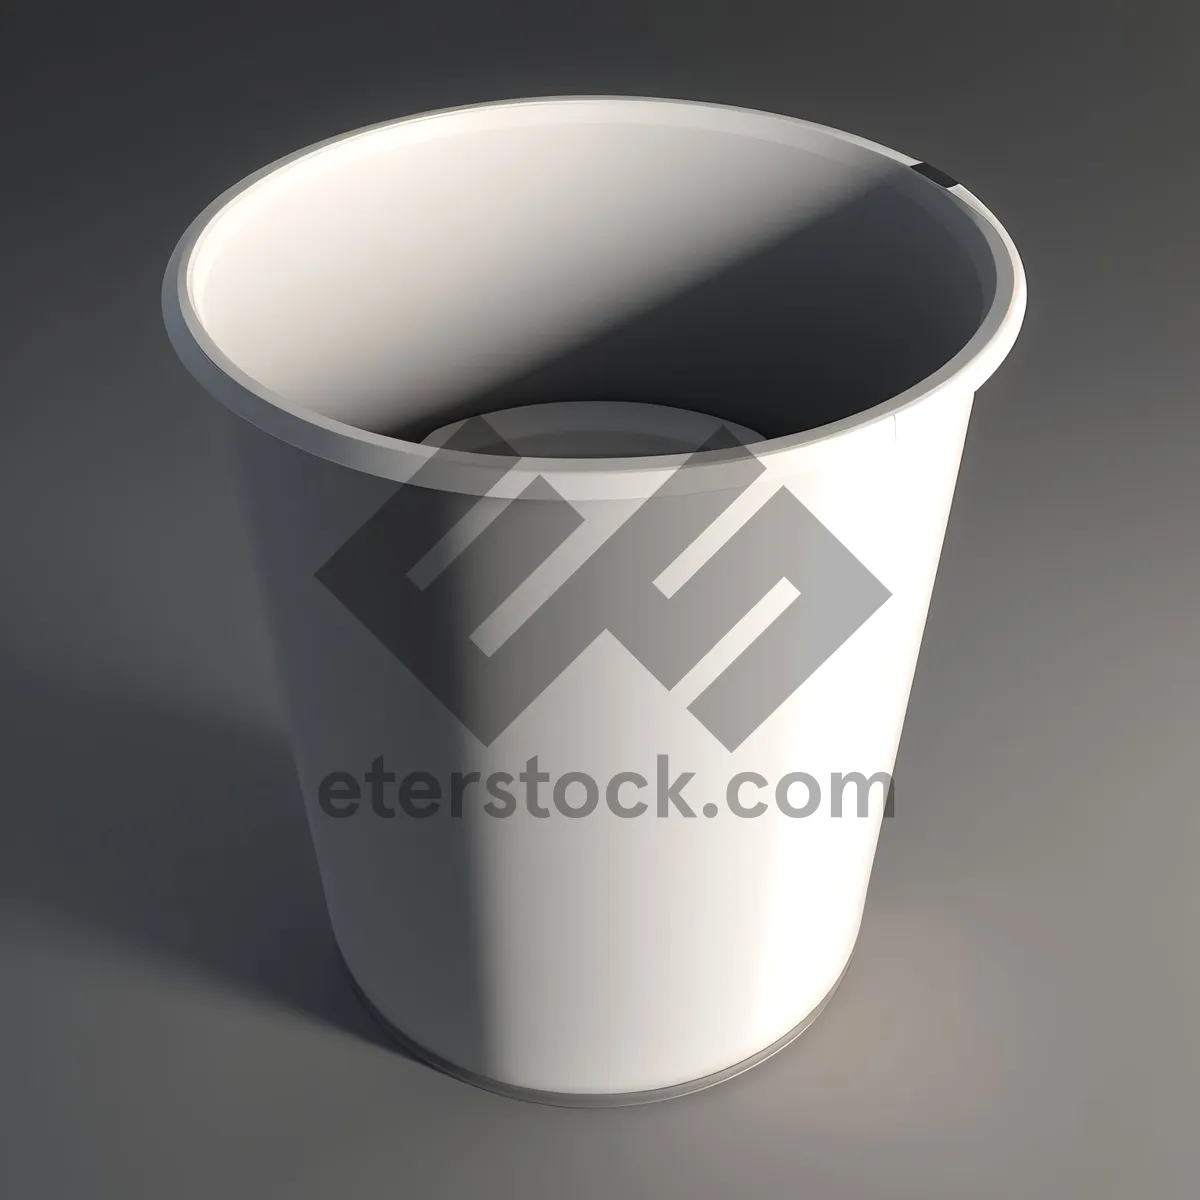 Picture of Hot Coffee Cup on Saucer - Breakfast Drinkware